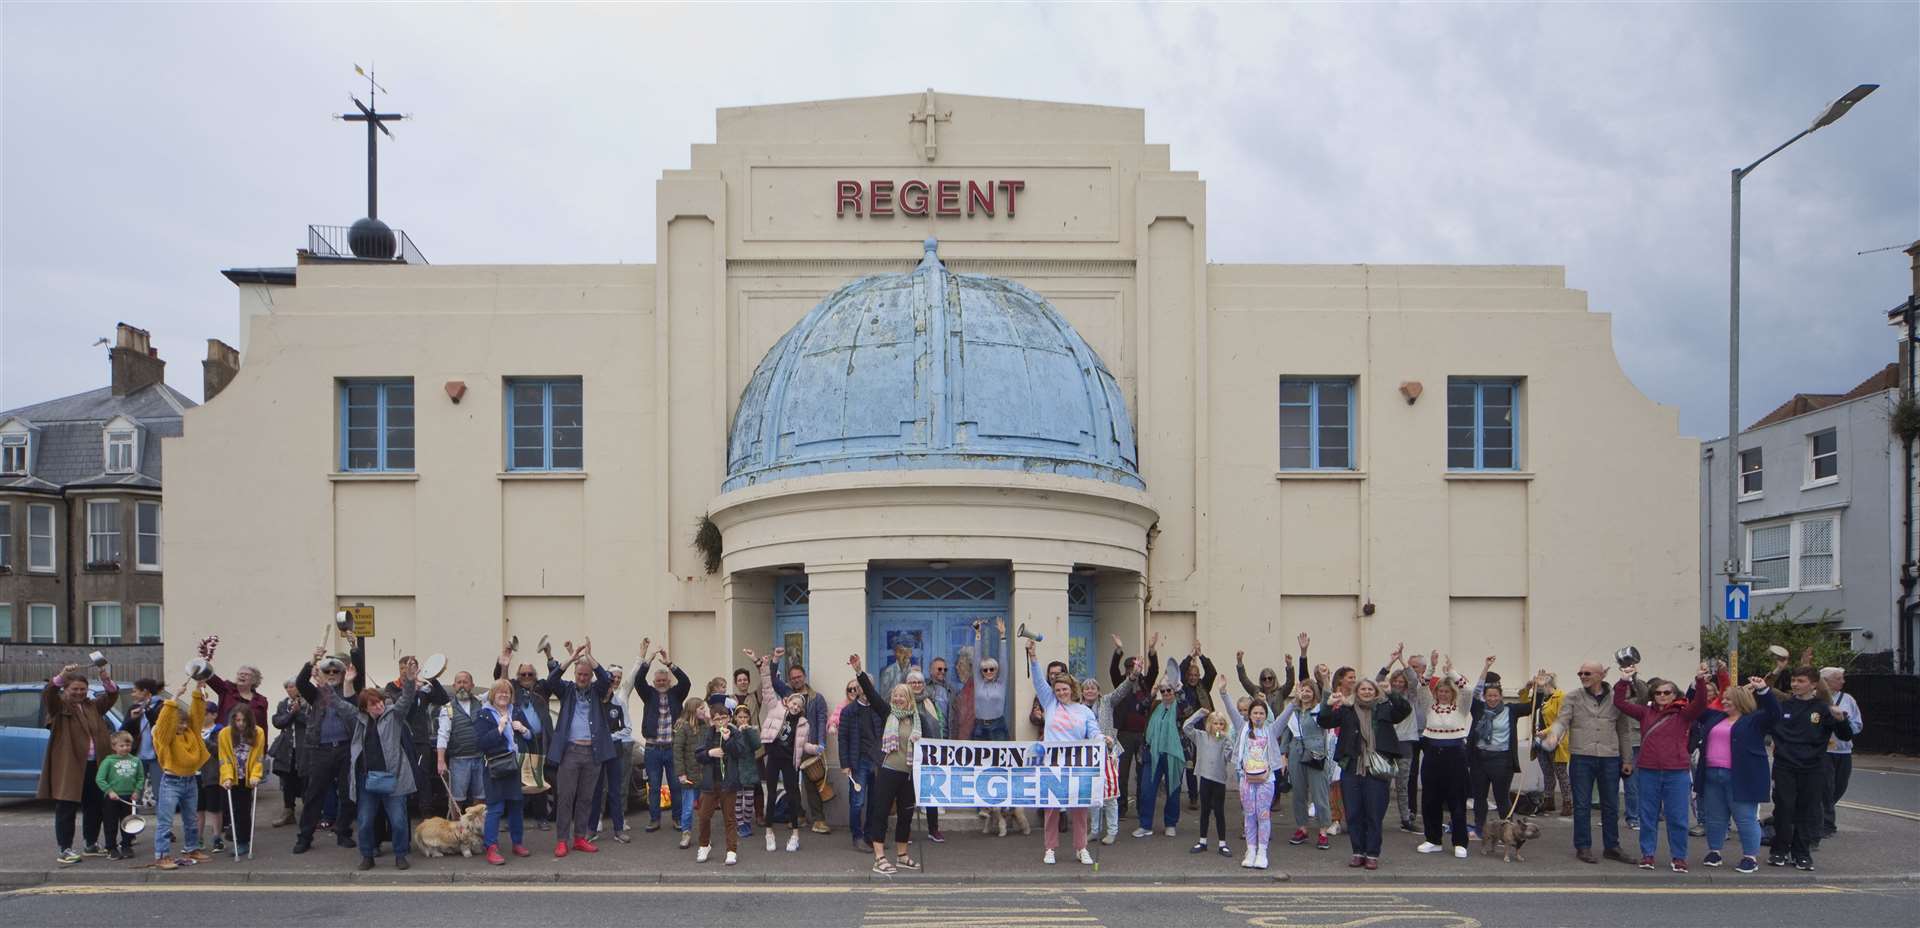 Reopen The Regent campaigners gathered for a Mayday protest outside the seafront building in Deal